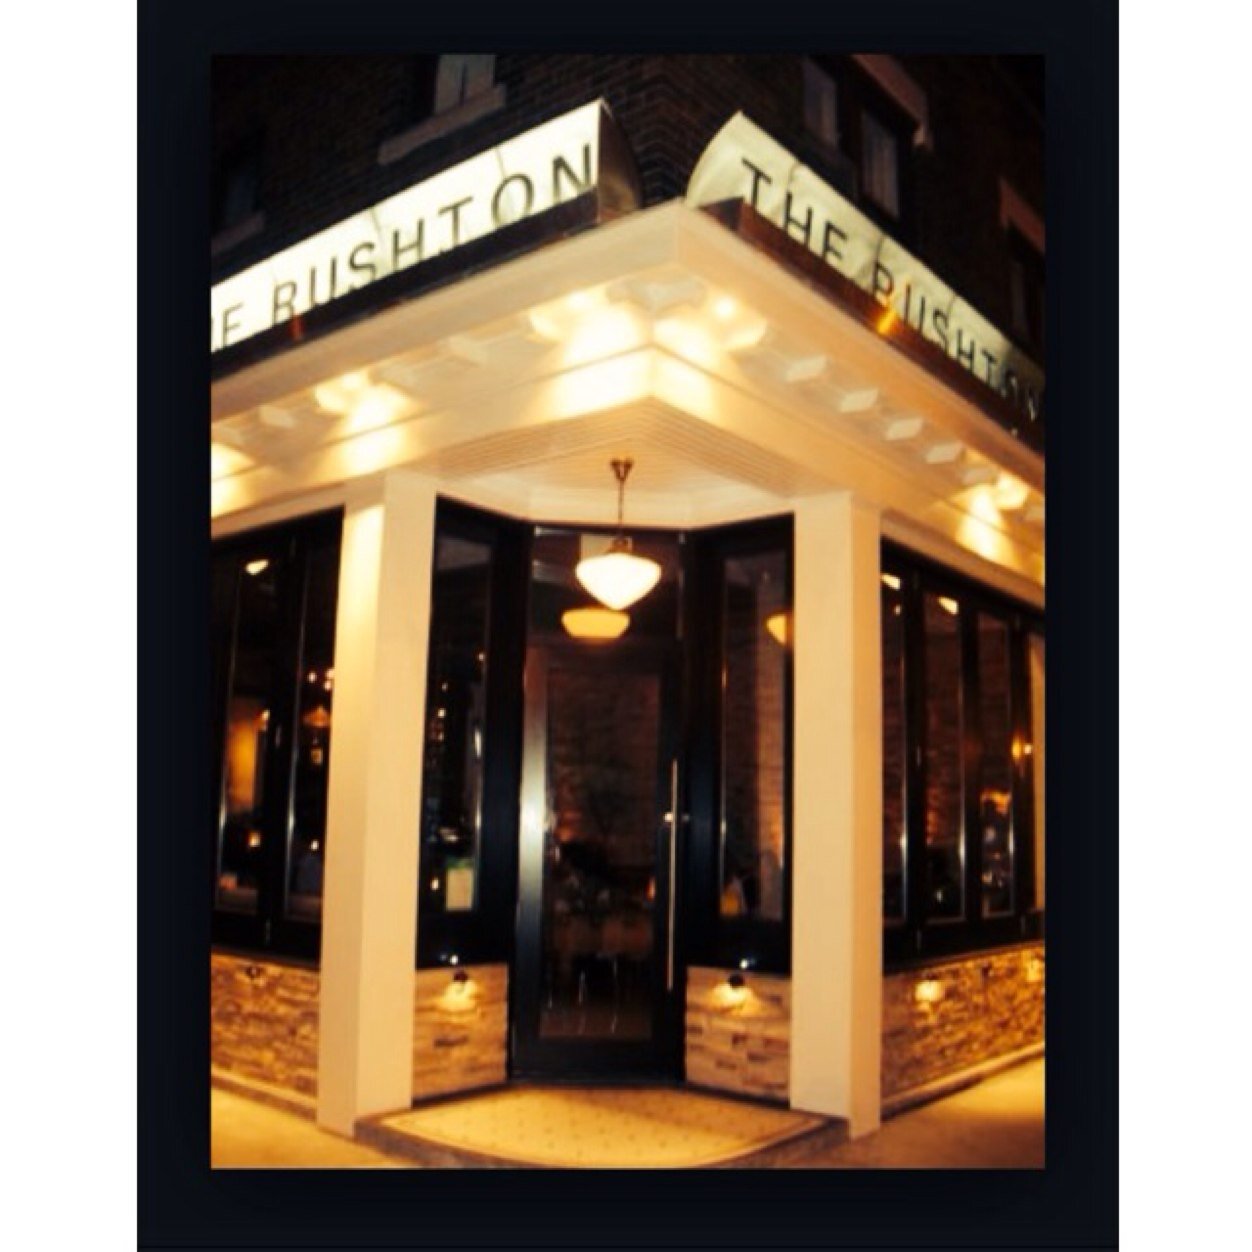 A cozy French inspired bistro situated in the heart of St. Clair West - 740 St.Clair Ave W (tel. 416-658-7874)